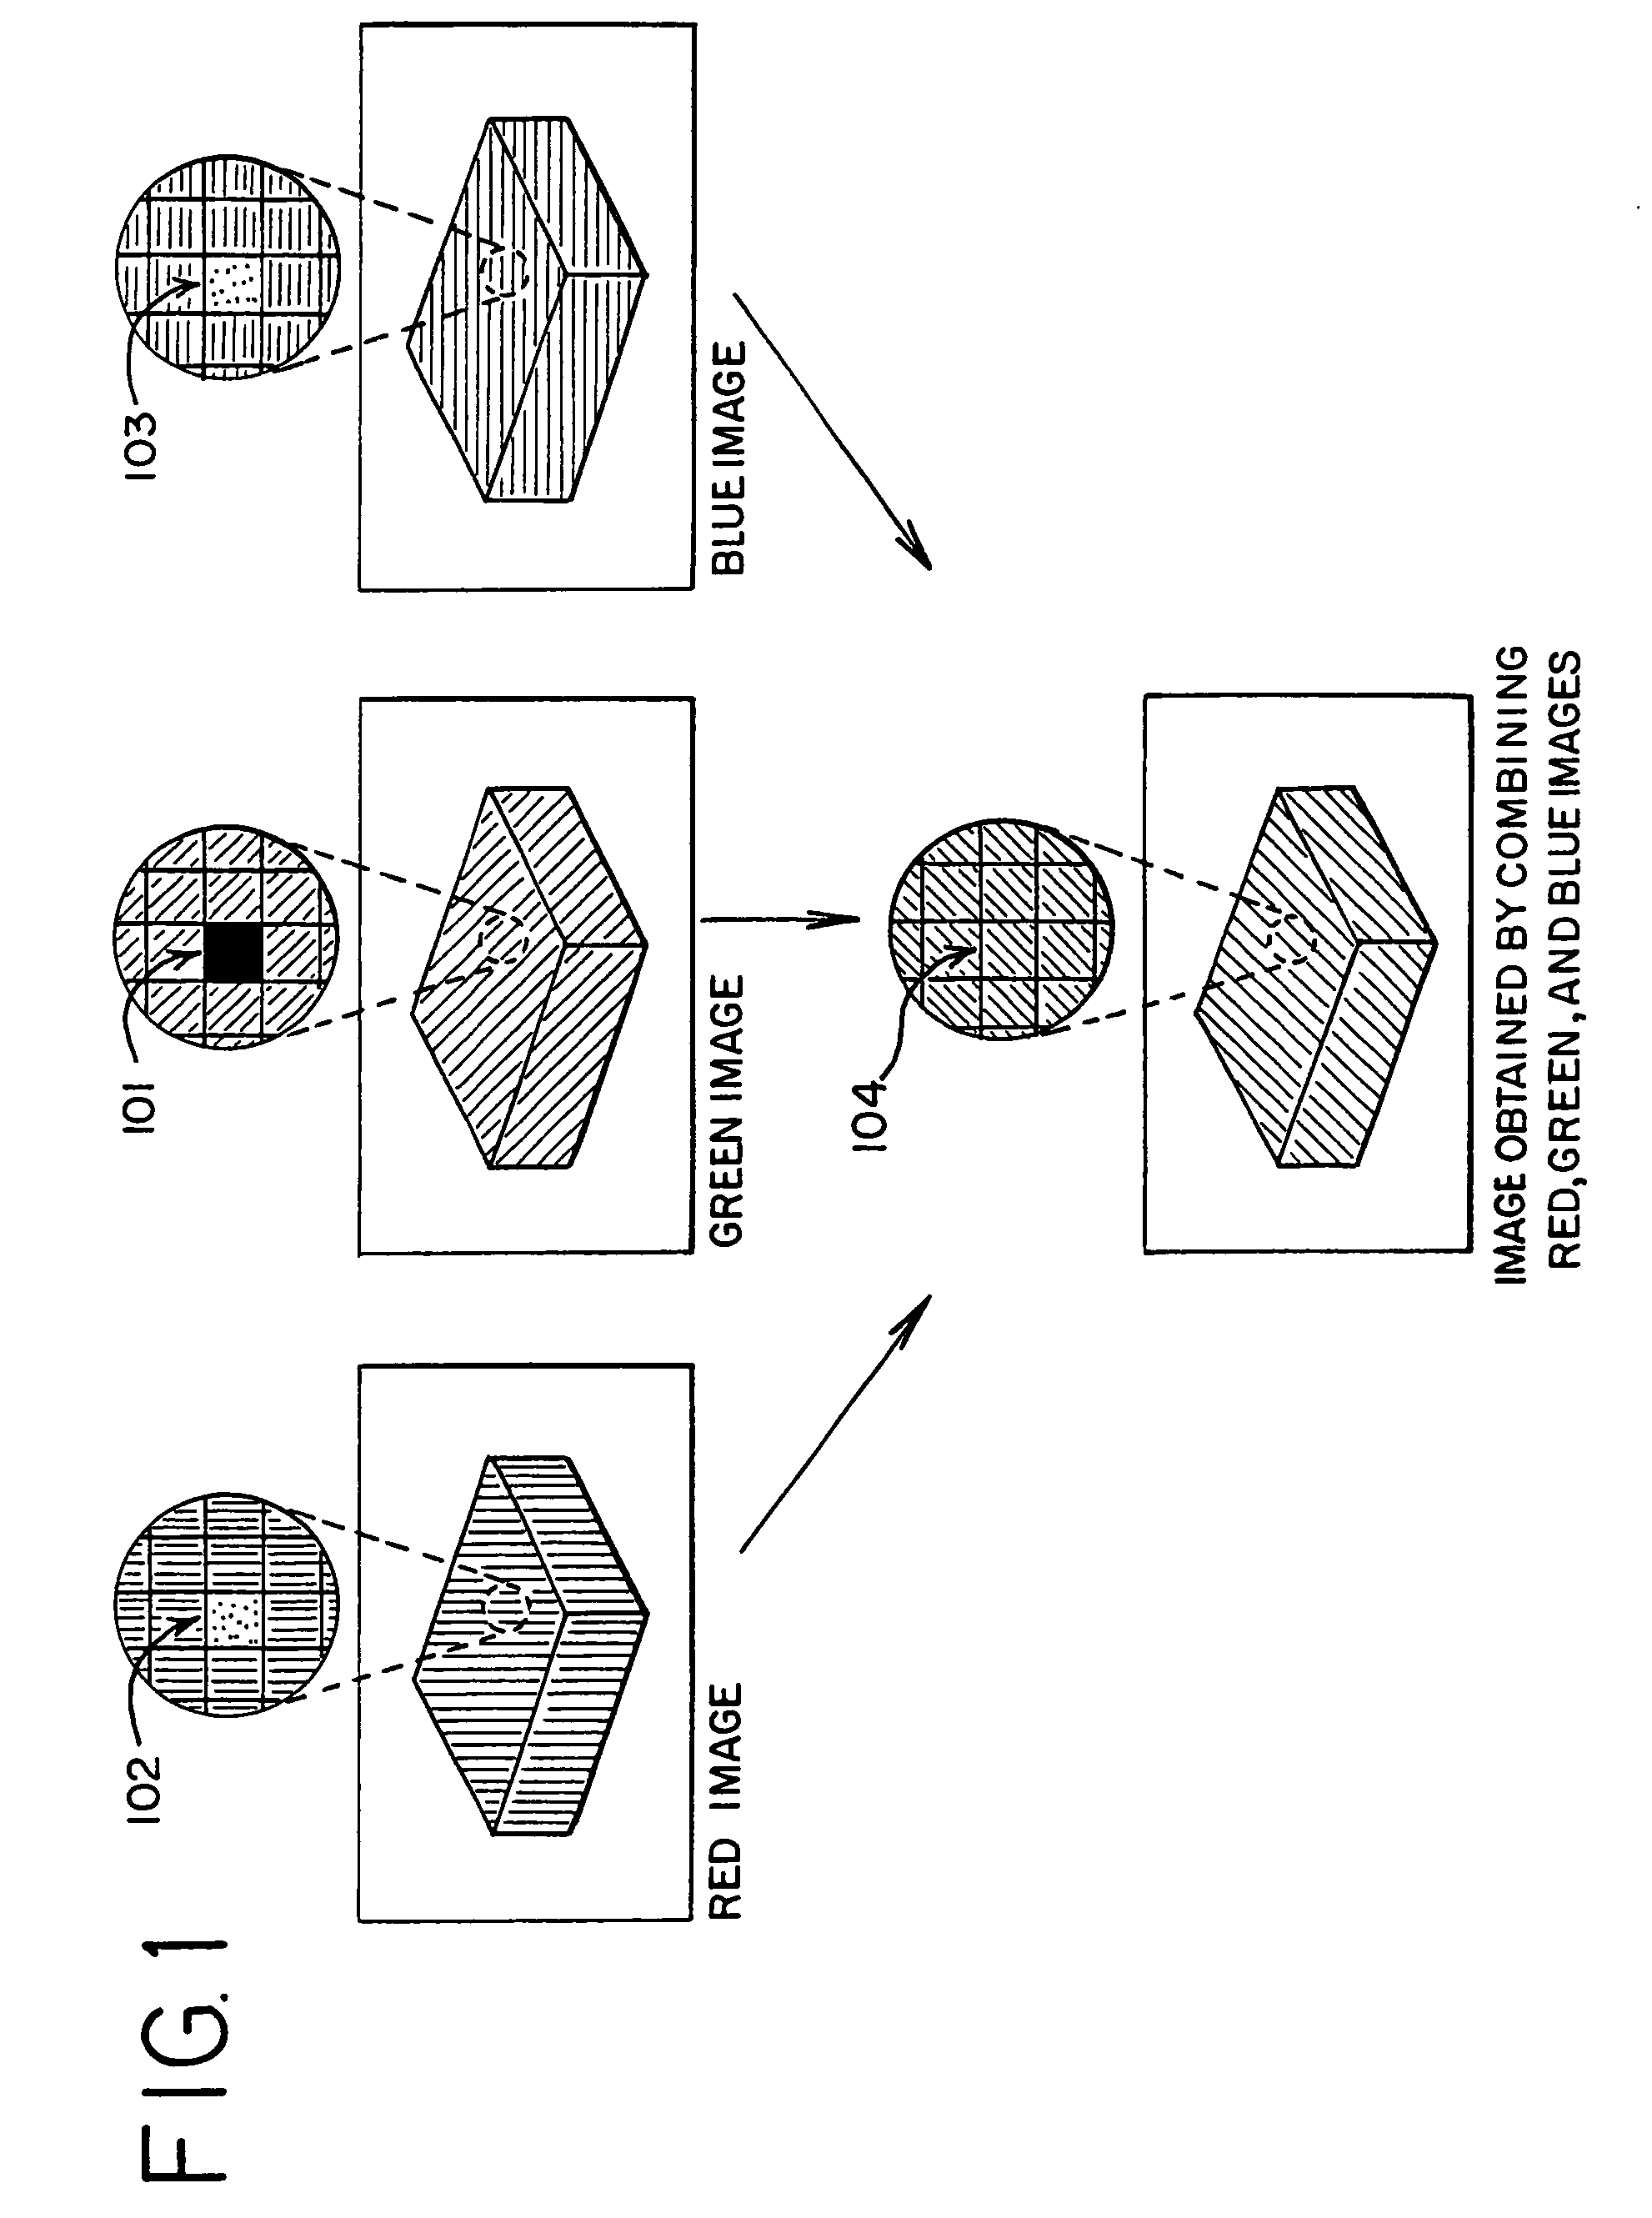 Defective pixel compensation system and display device using the system